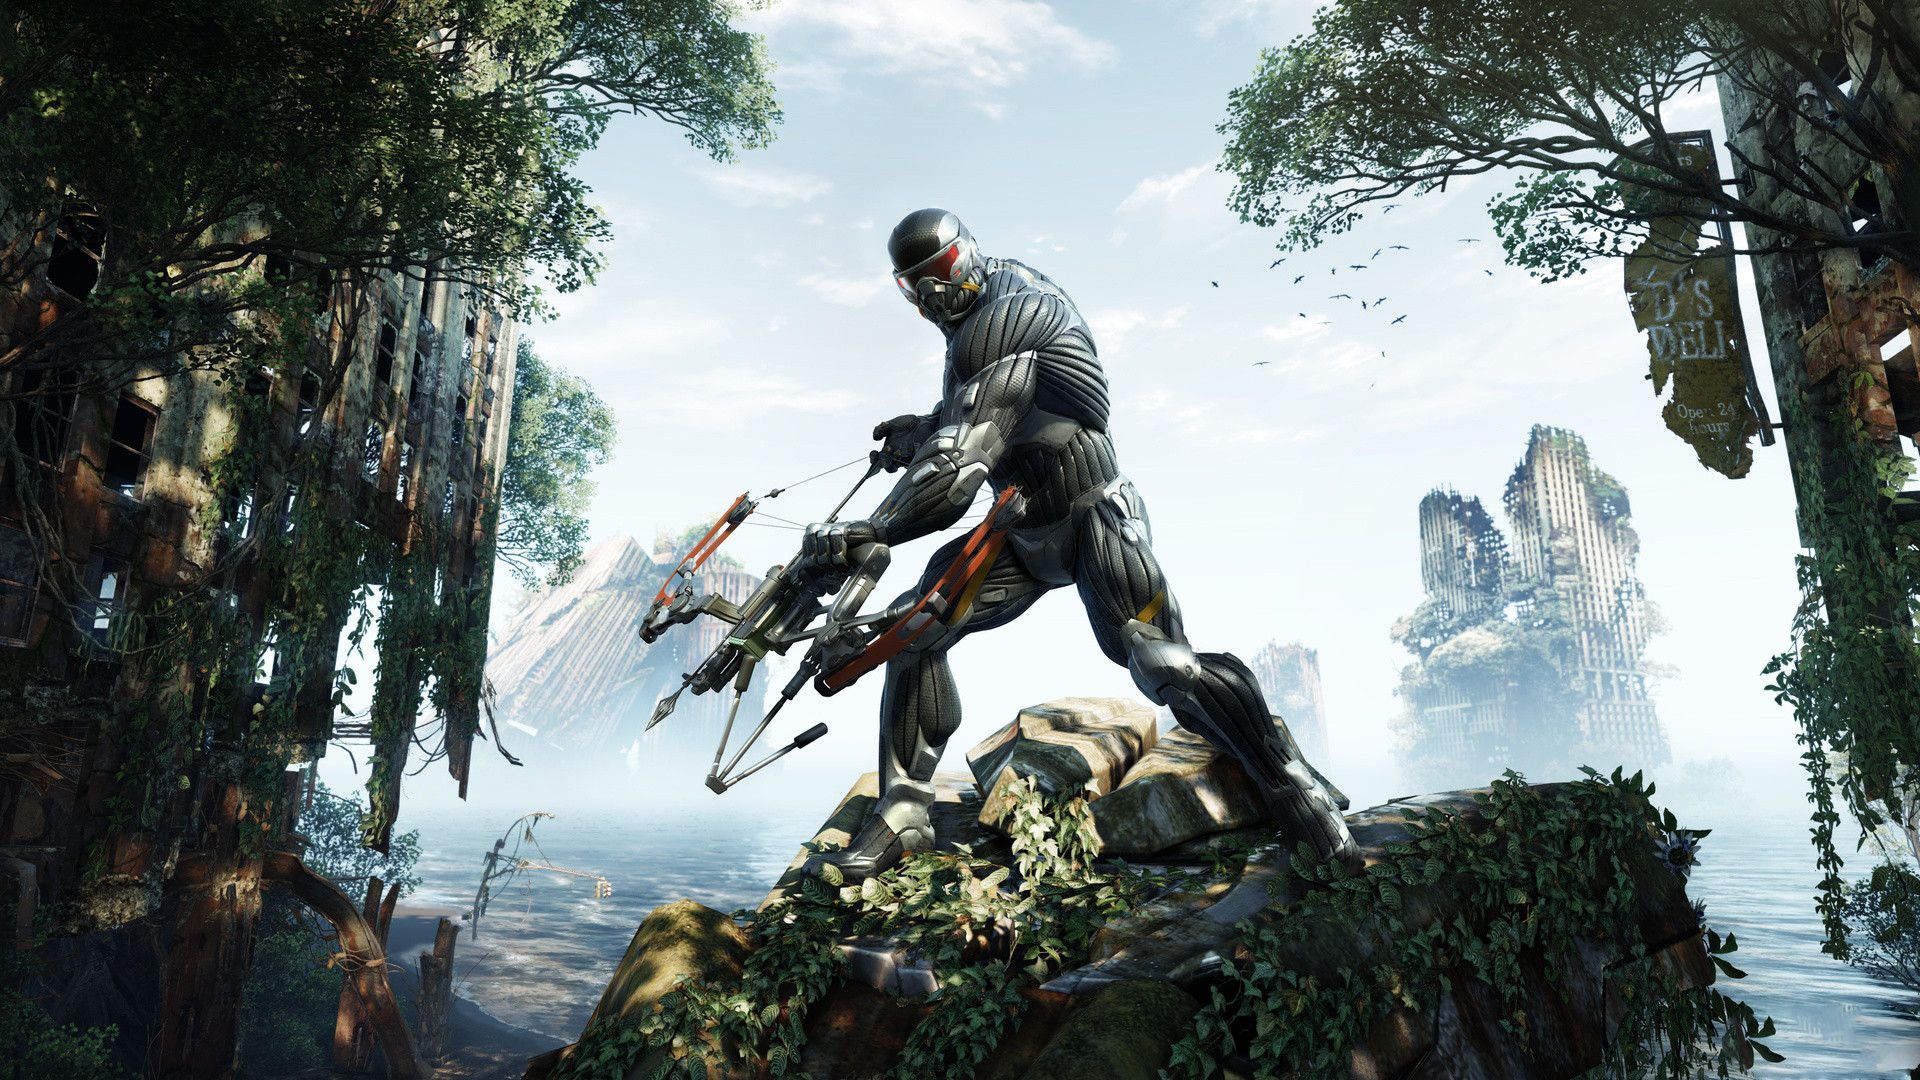 Wallpapers Tagged With CRYSIS CRYSIS HD Wallpapers